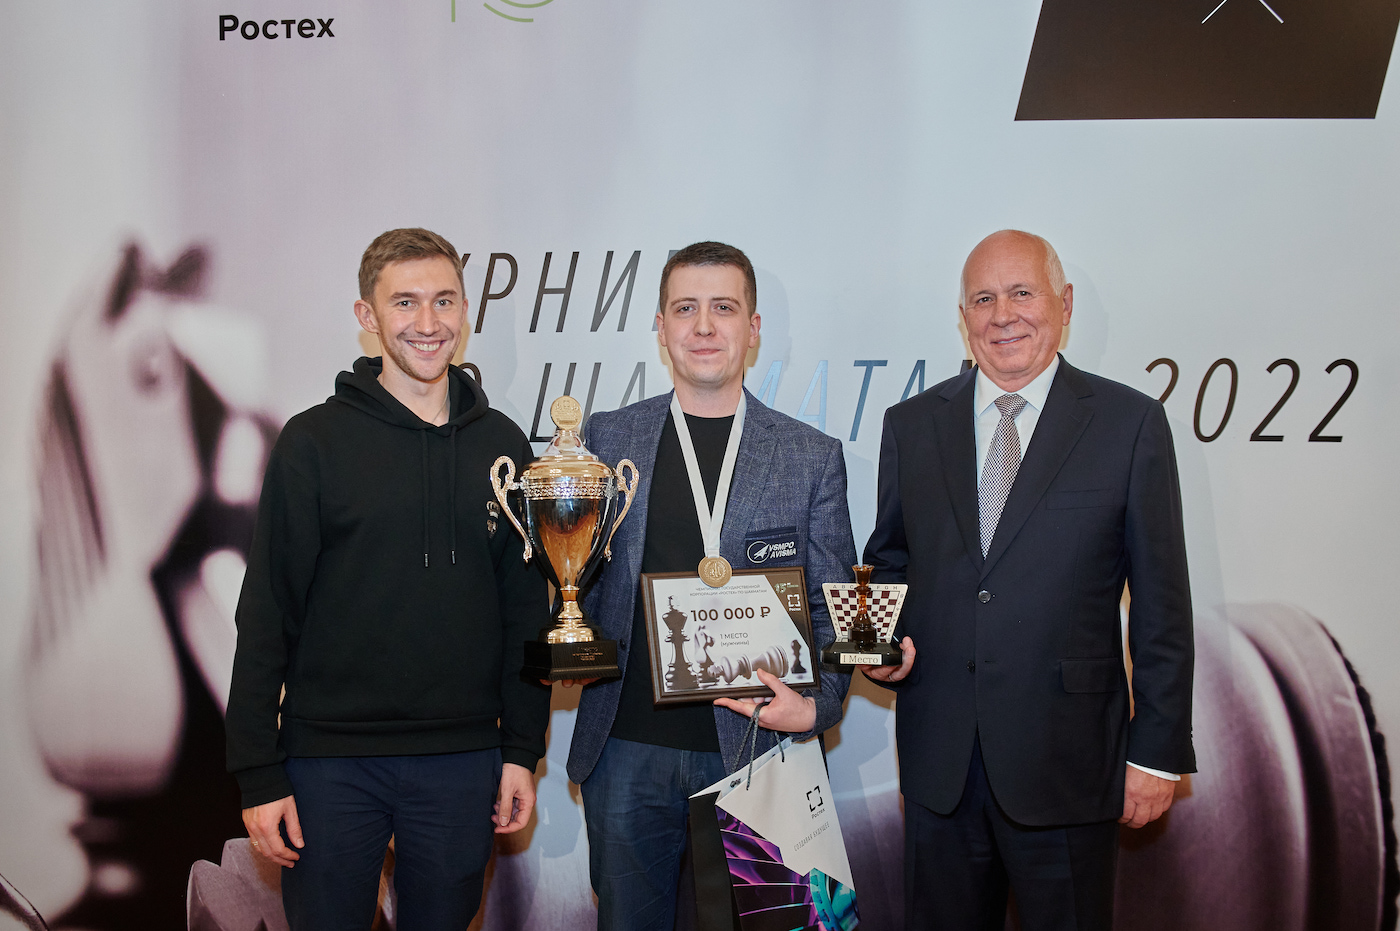 Rostec Held the First Corporate Chess Championship